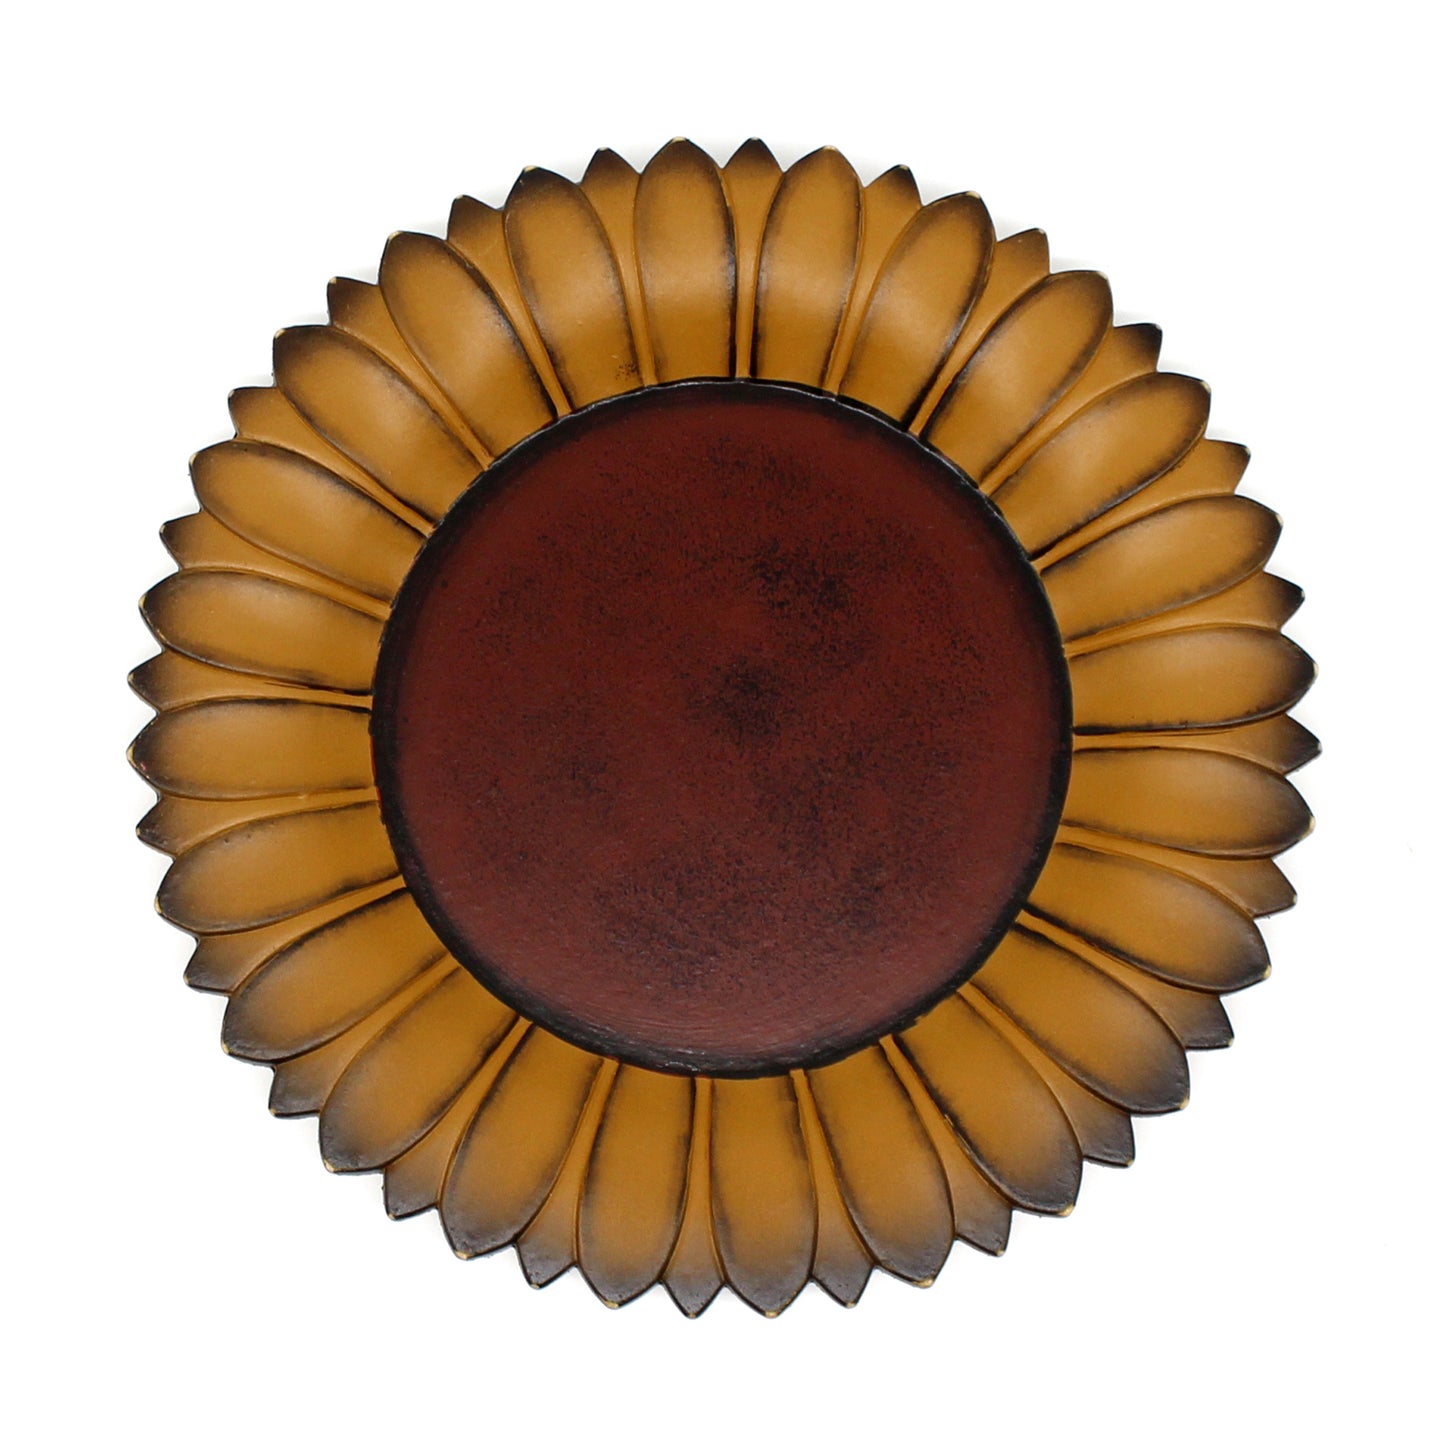 CVHOMEDECO. Sunflower Shape Plate Primitives Rustic Display Wooden Plate Home and Office Décor Art, 11 Inch